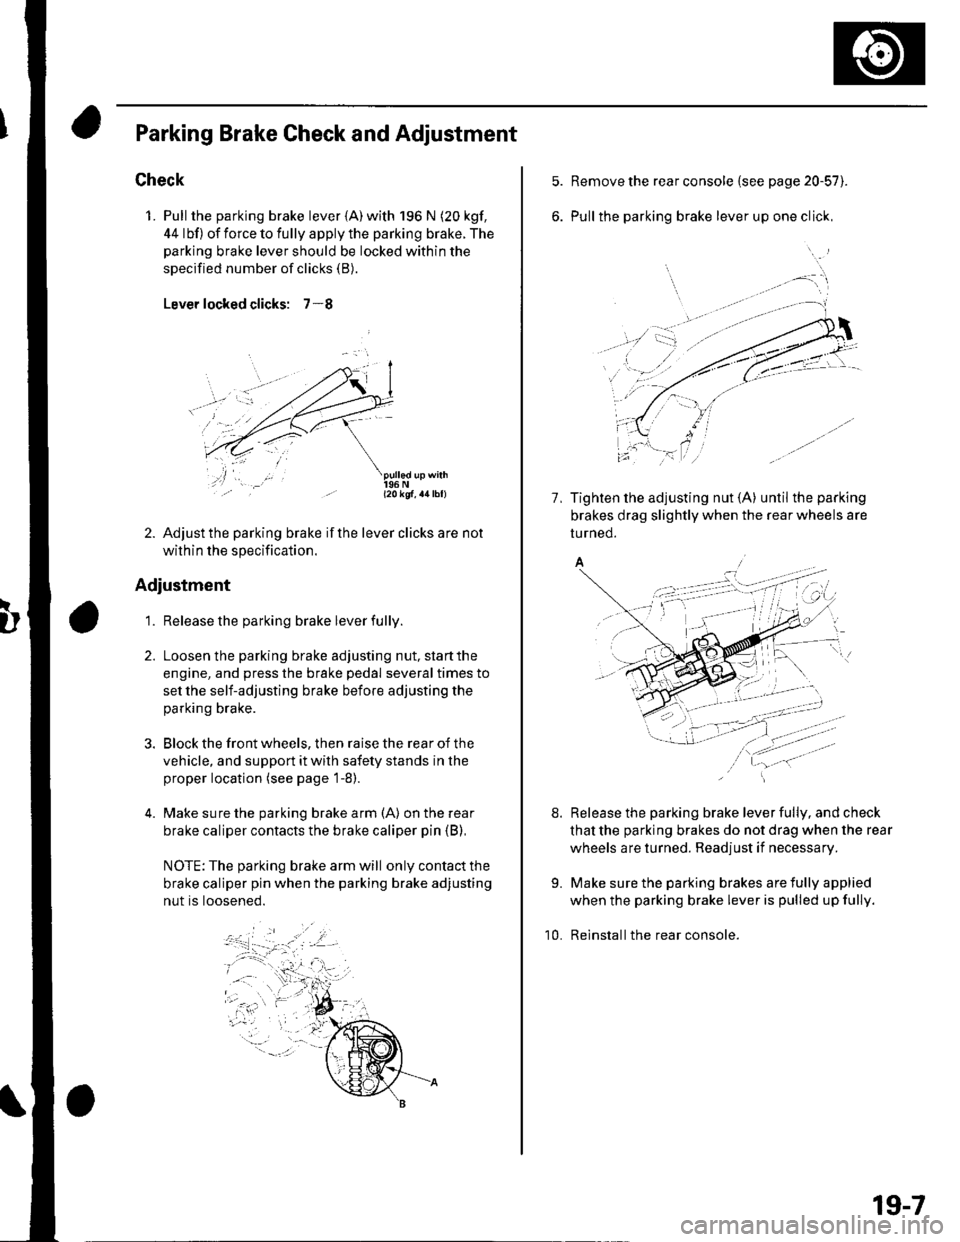 HONDA CIVIC 2003 7.G Workshop Manual Parking Brake Check and Adiustment
Check
1. Pull the parking brake lever {A) with 196 N (20 kgf,
44 lbf) of force to fully apply the parking brake. The
parking brake lever should be locked within the
